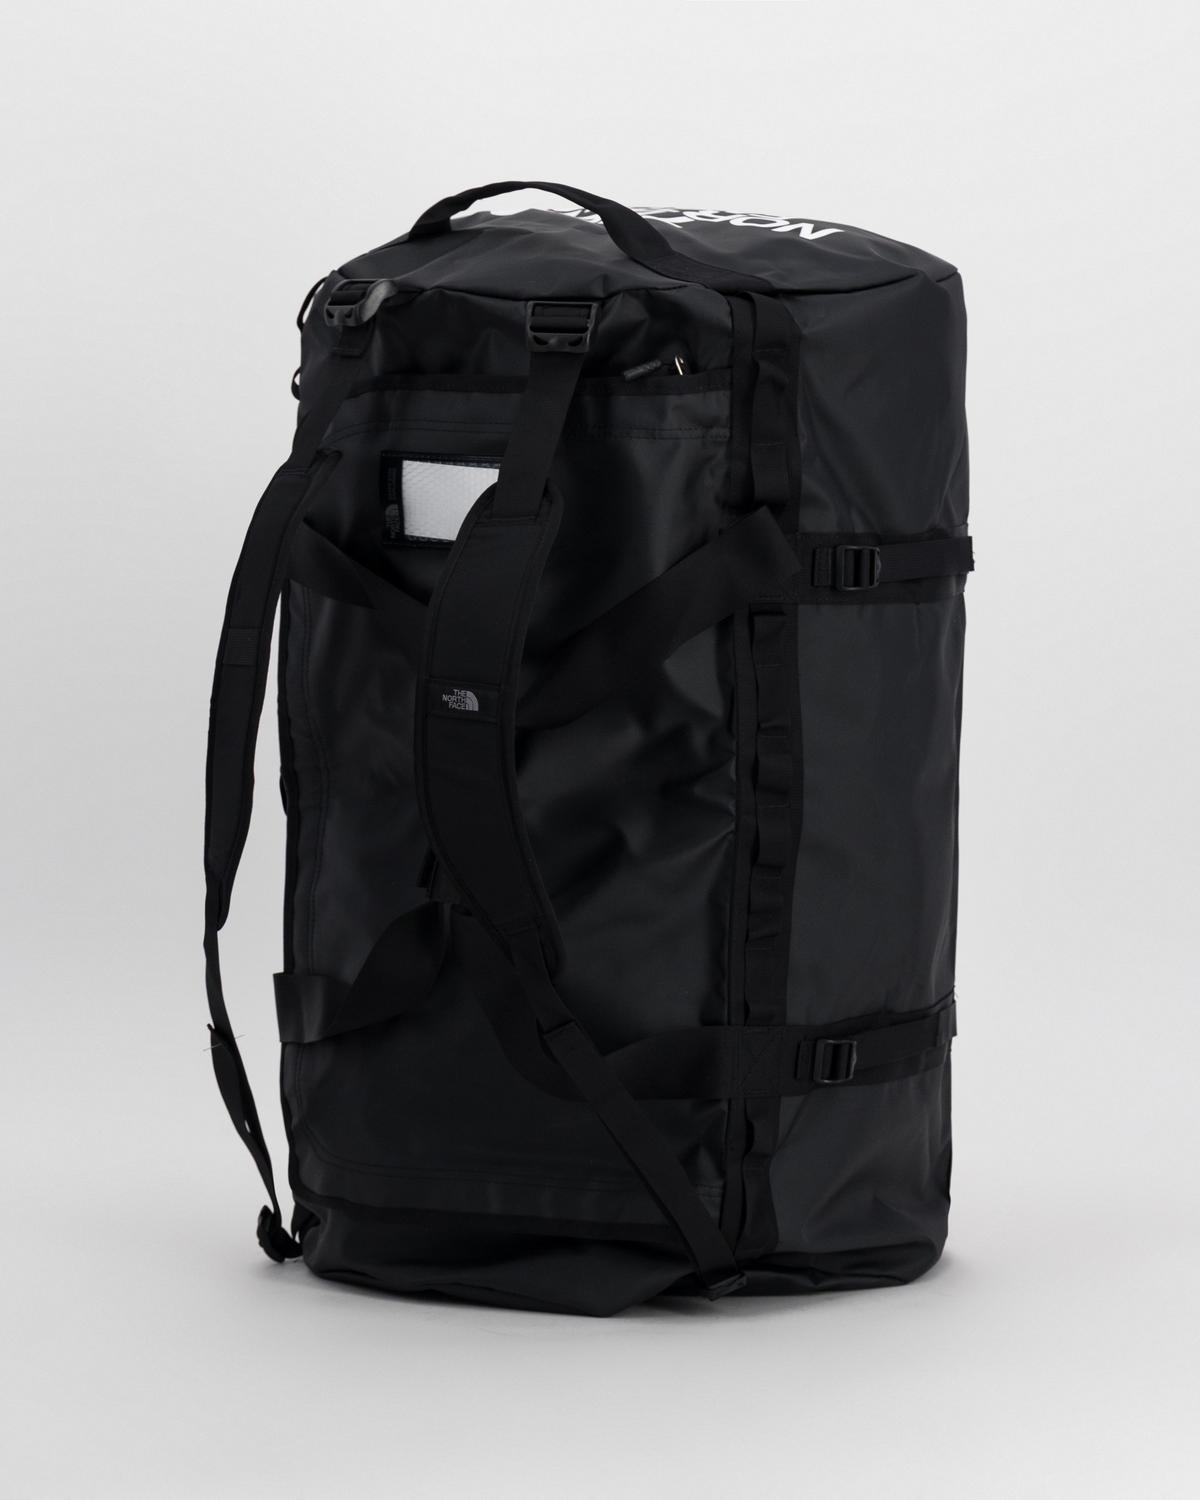 The North Face Extra-Large Base Camp Duffel Bag -  Black